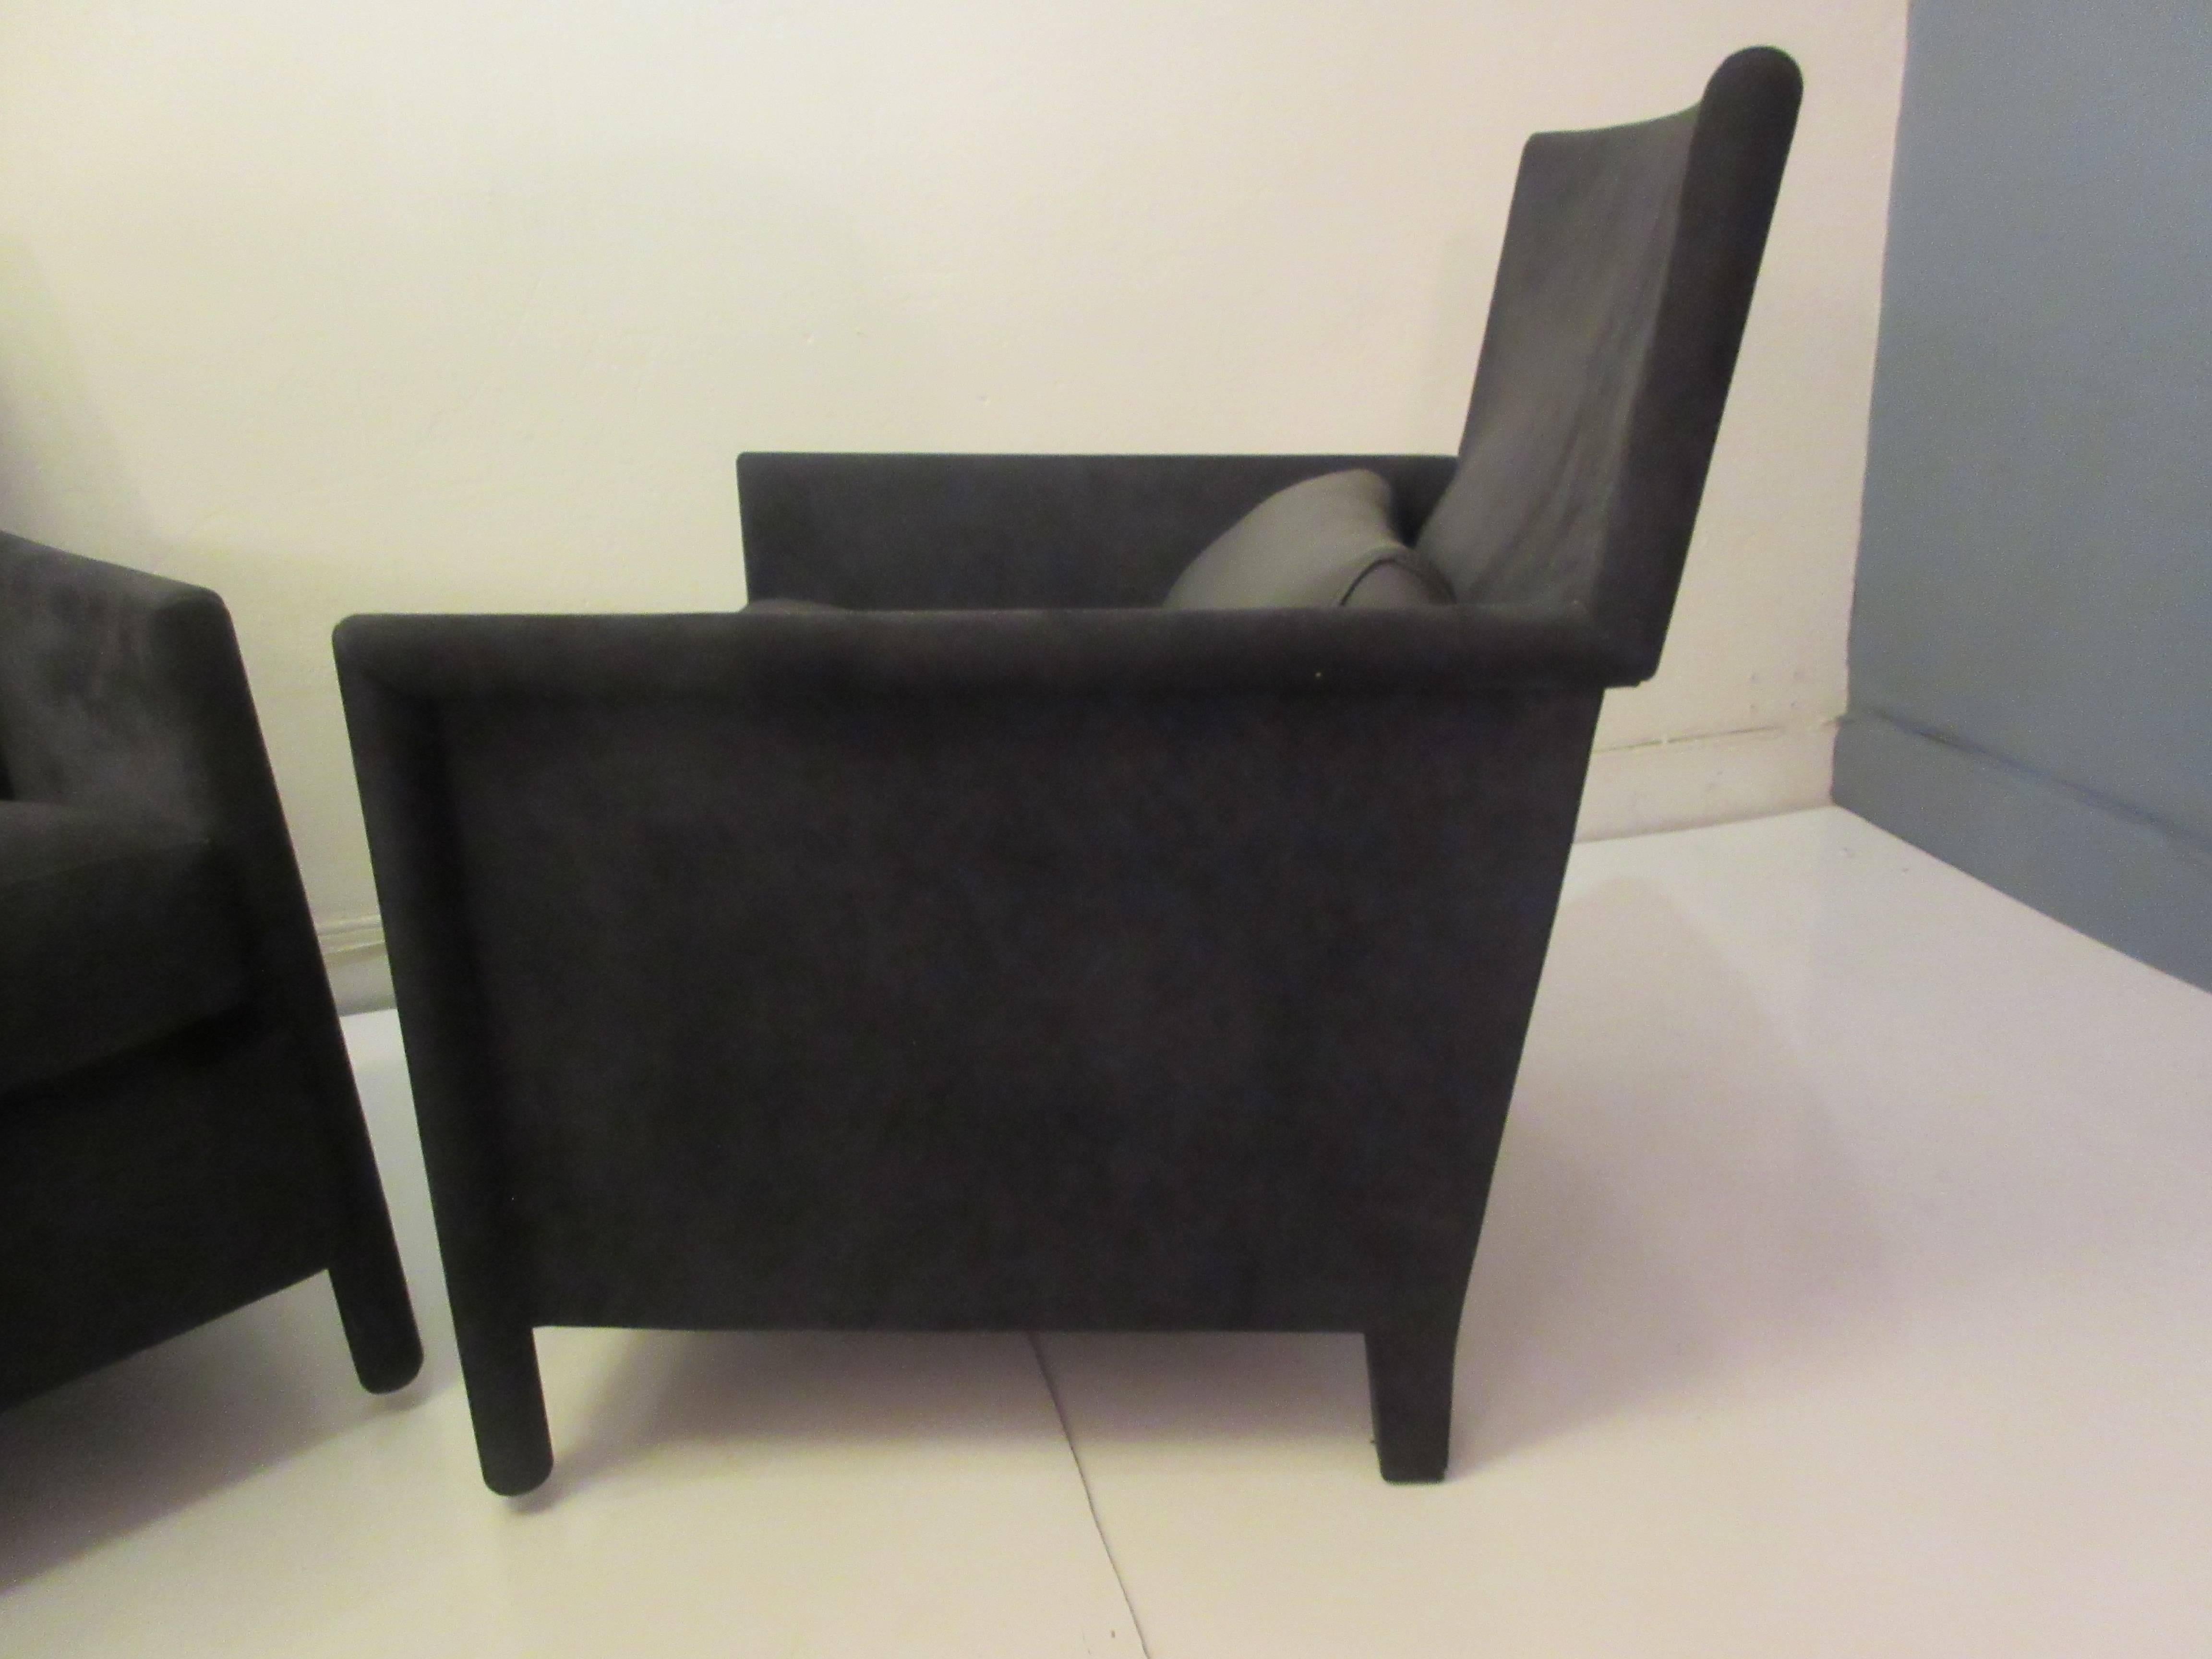 Molteni leather armchairs in charcoal suede with a black leather bolster lumbar cushion. Chairs are completely covered by leather including legs giving a smart tailored appearance. Each retains a label. Chairs are 1990s editions of this venerable